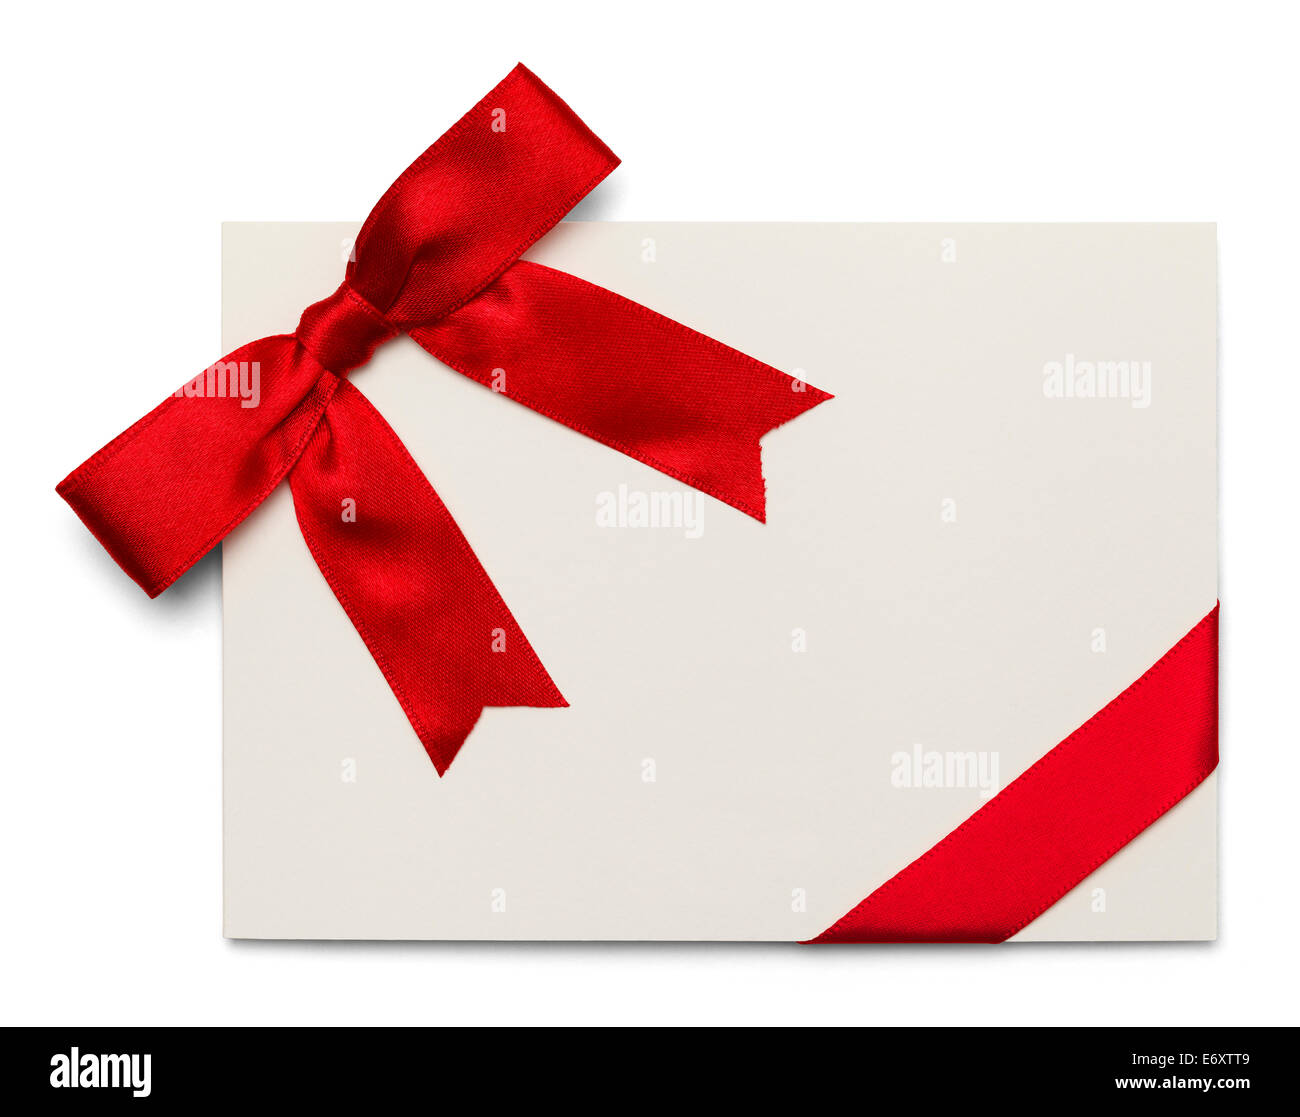 Blank Card With Red Bow and Ribbon Isolated on White Background. Stock Photo